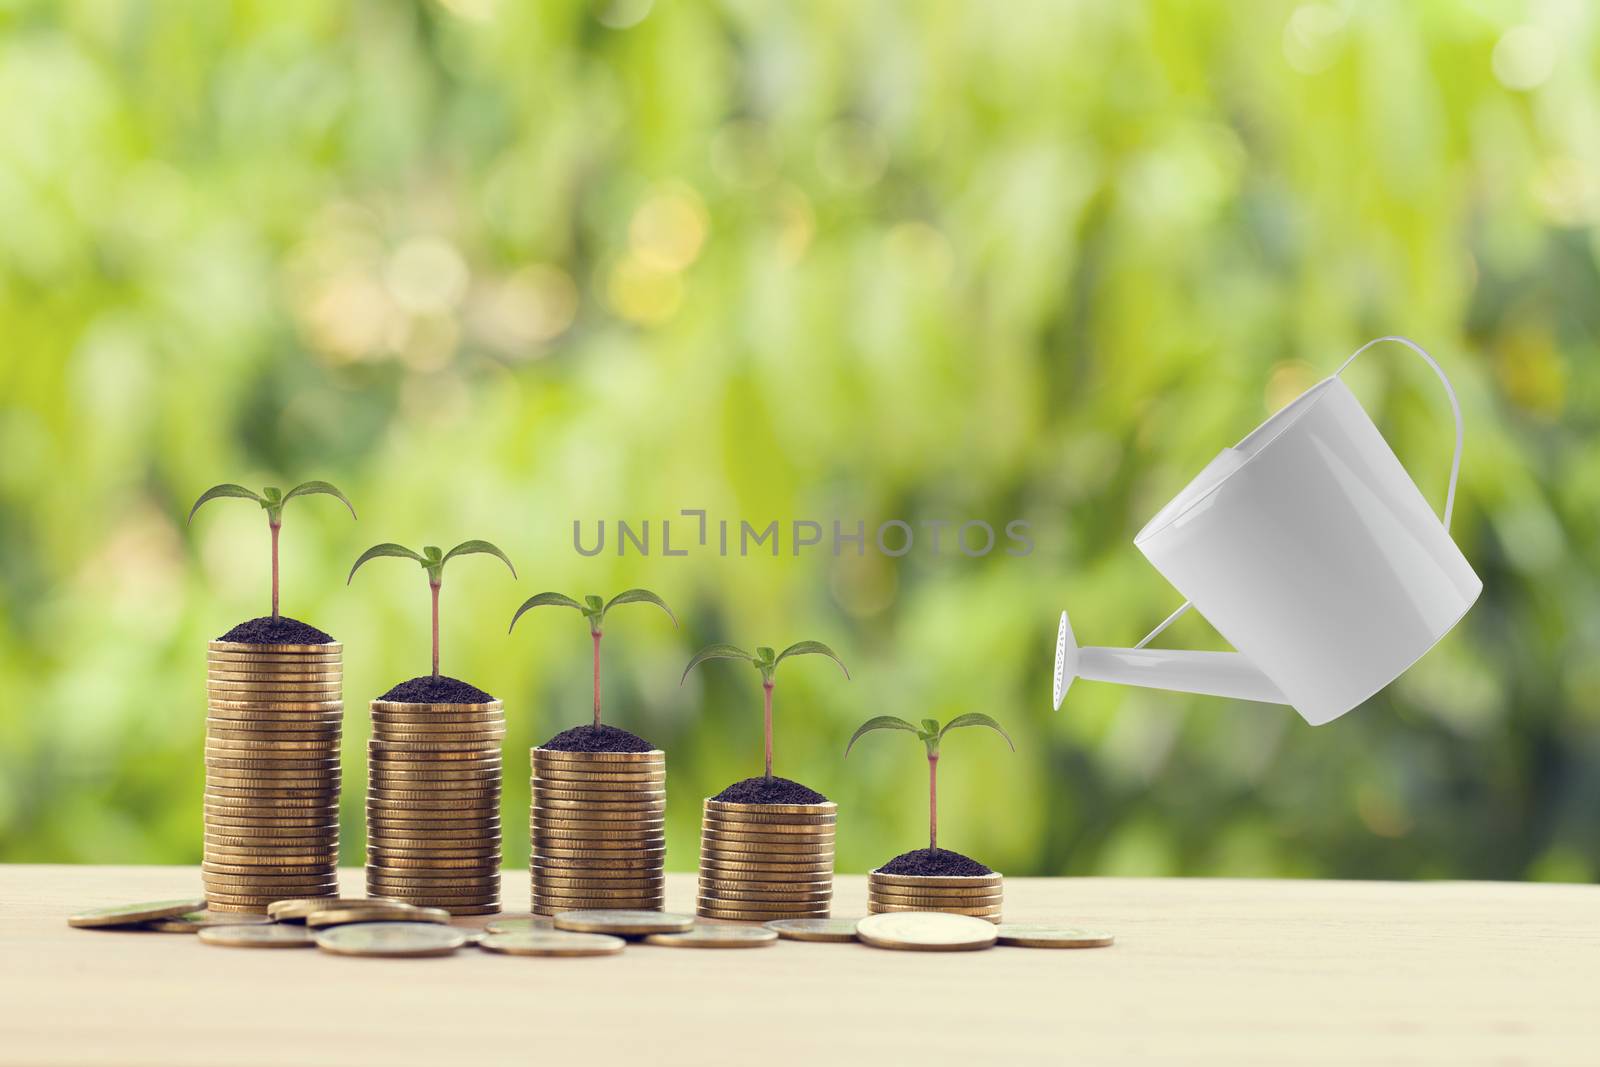 Banking and finance, Saving money concept: Water being poured on green sprout on rows of increasing coins on wood table in the natural green background. Depicts asset security for sustainable growth.